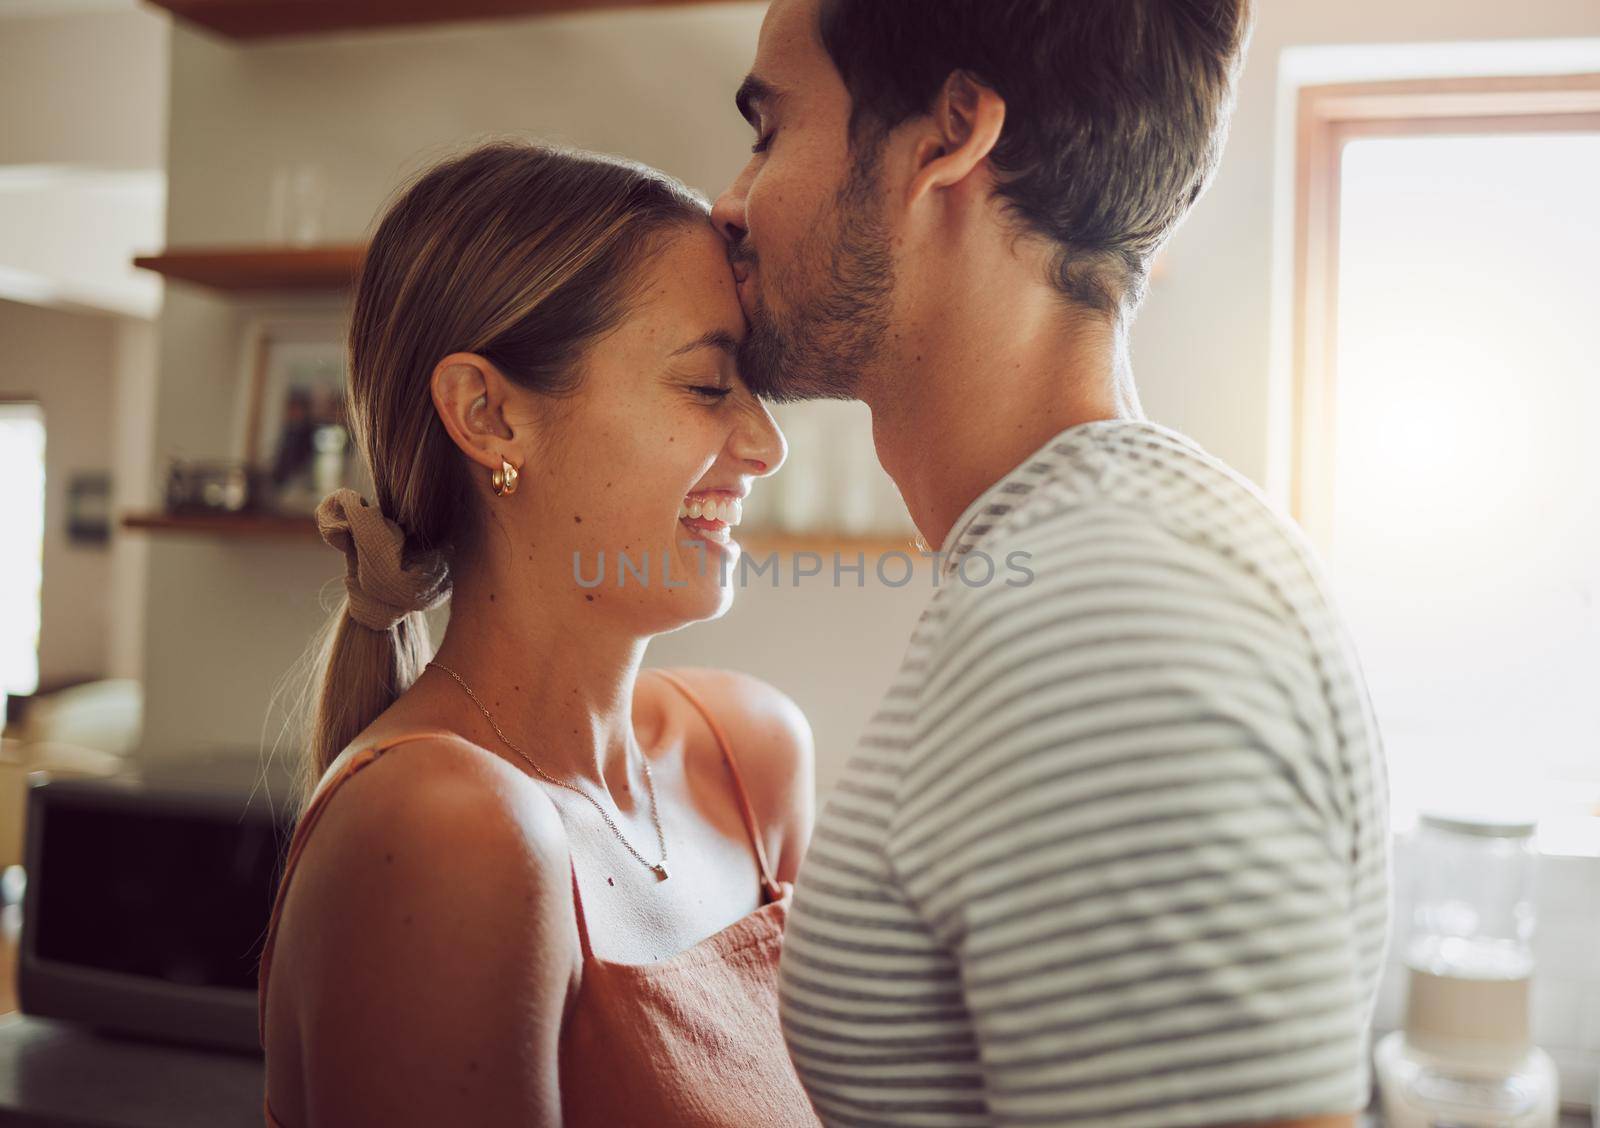 Affectionate, loving and romantic couple in a happy relationship together in the kitchen at home. Man and woman sharing a moment of happiness, romance and bonding with each other in love